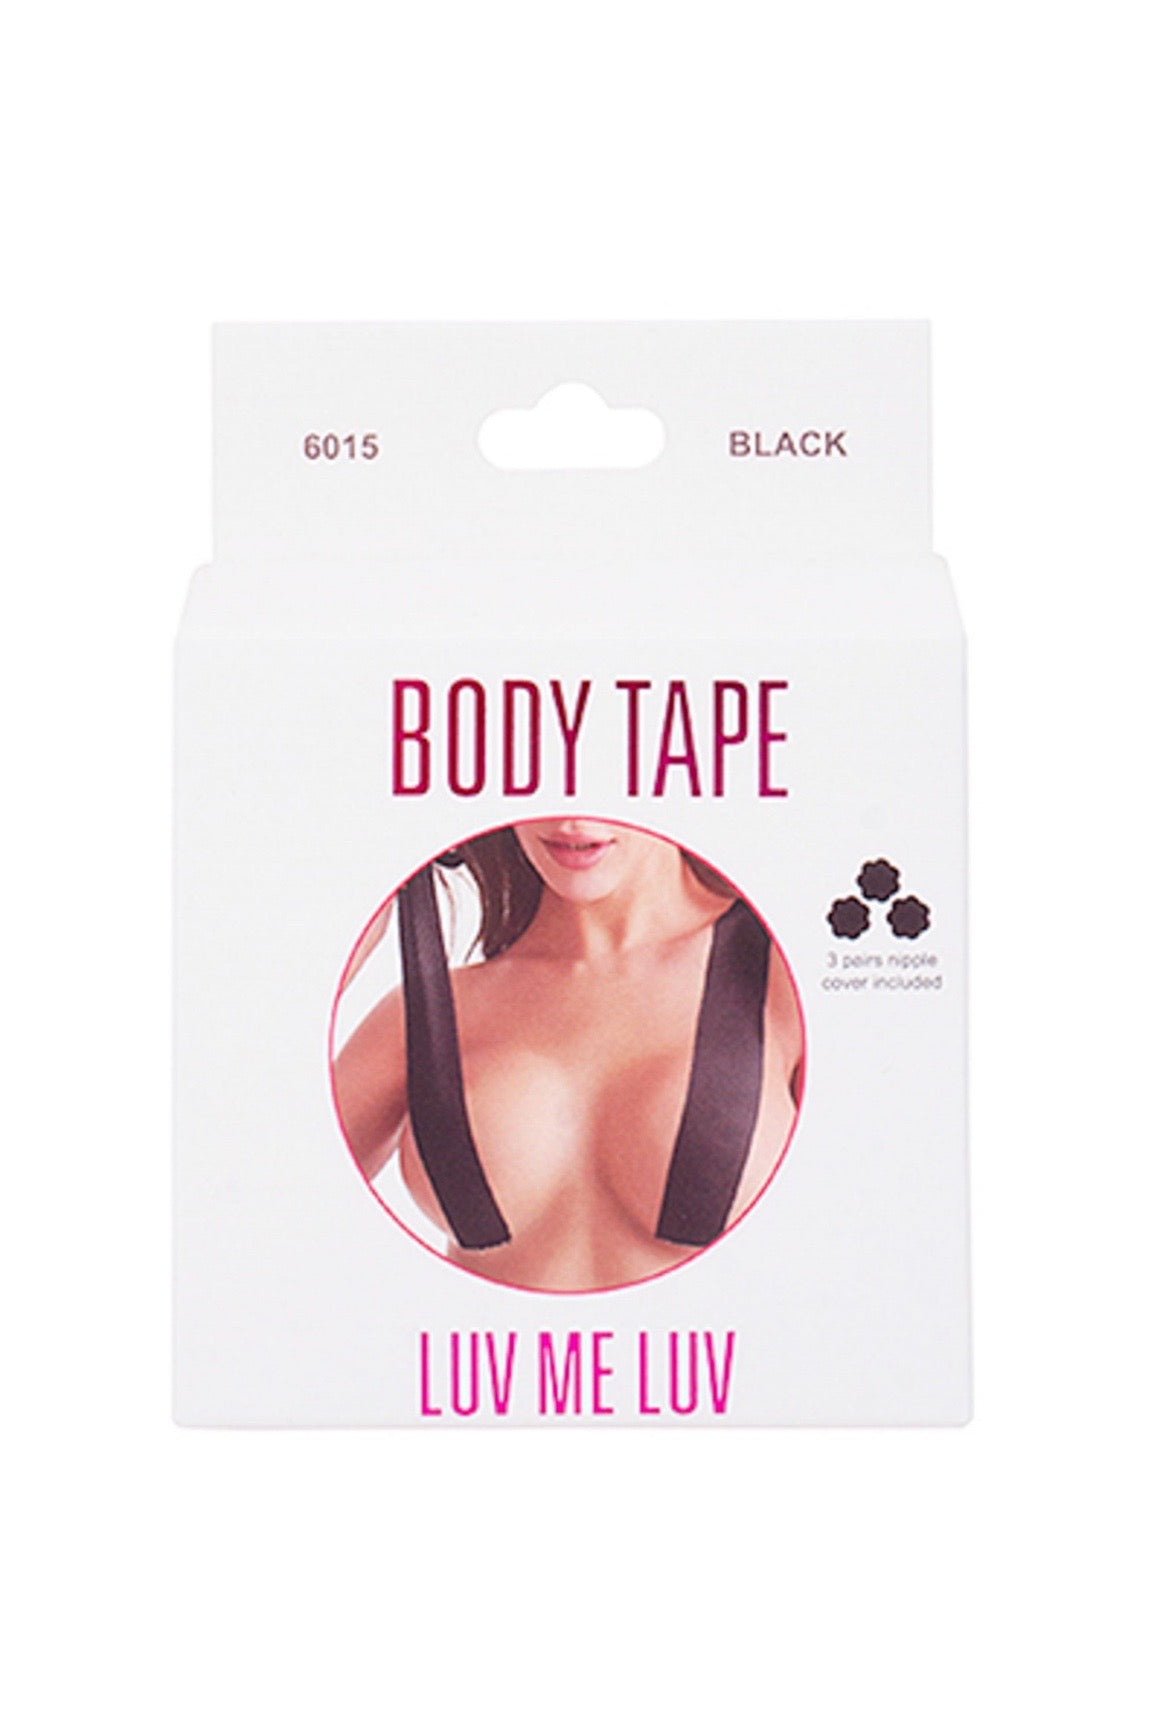 Body Tape by Luv Me Luv Joia Accessories